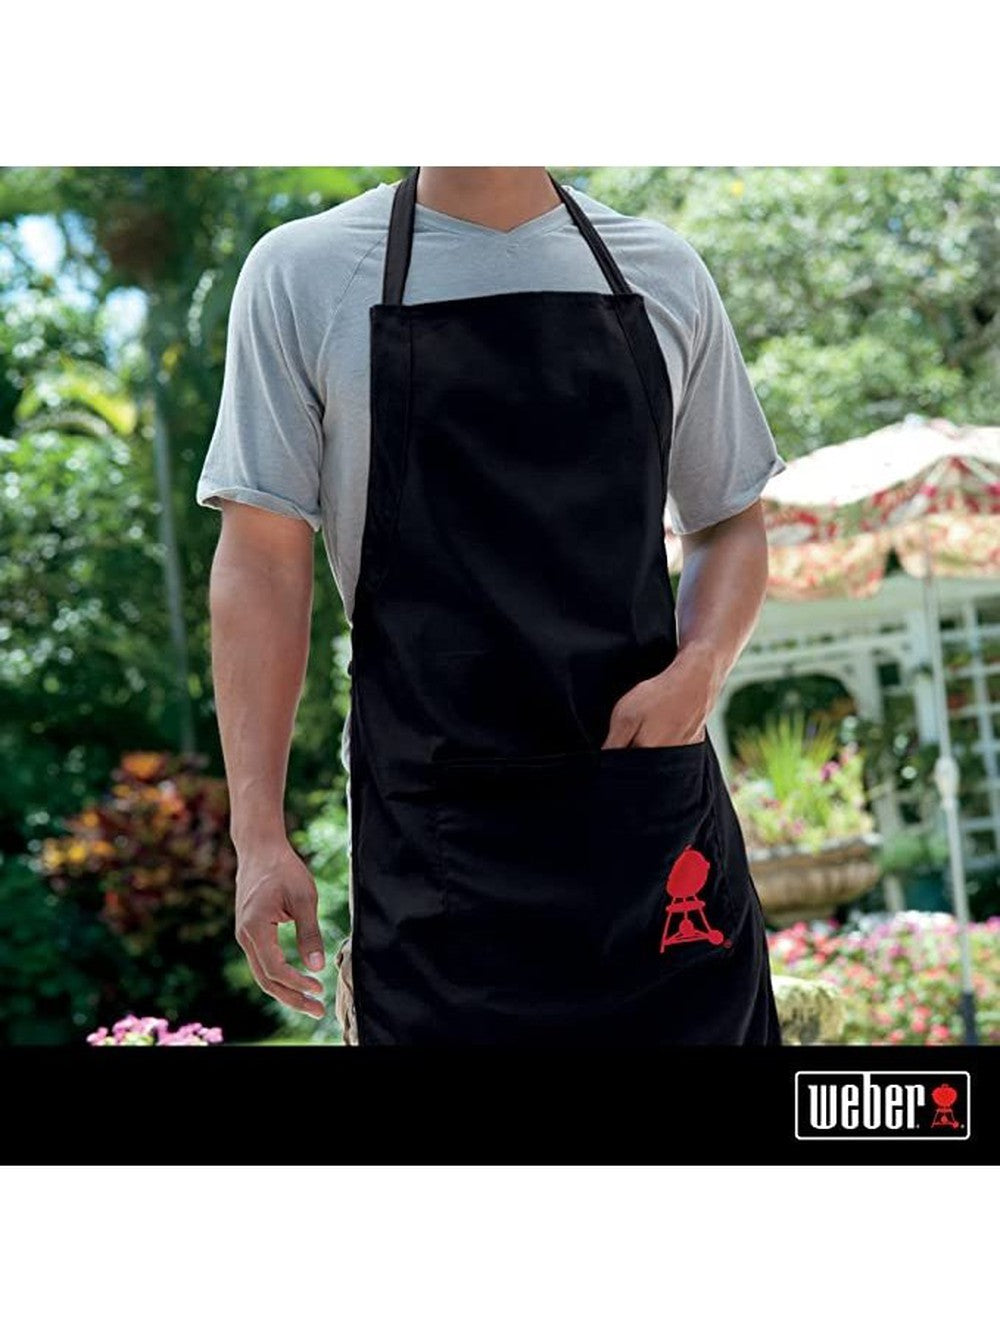 Weber Apron - Black with Embroidered Red Kettle Weber Chilliwack BBQ Supply